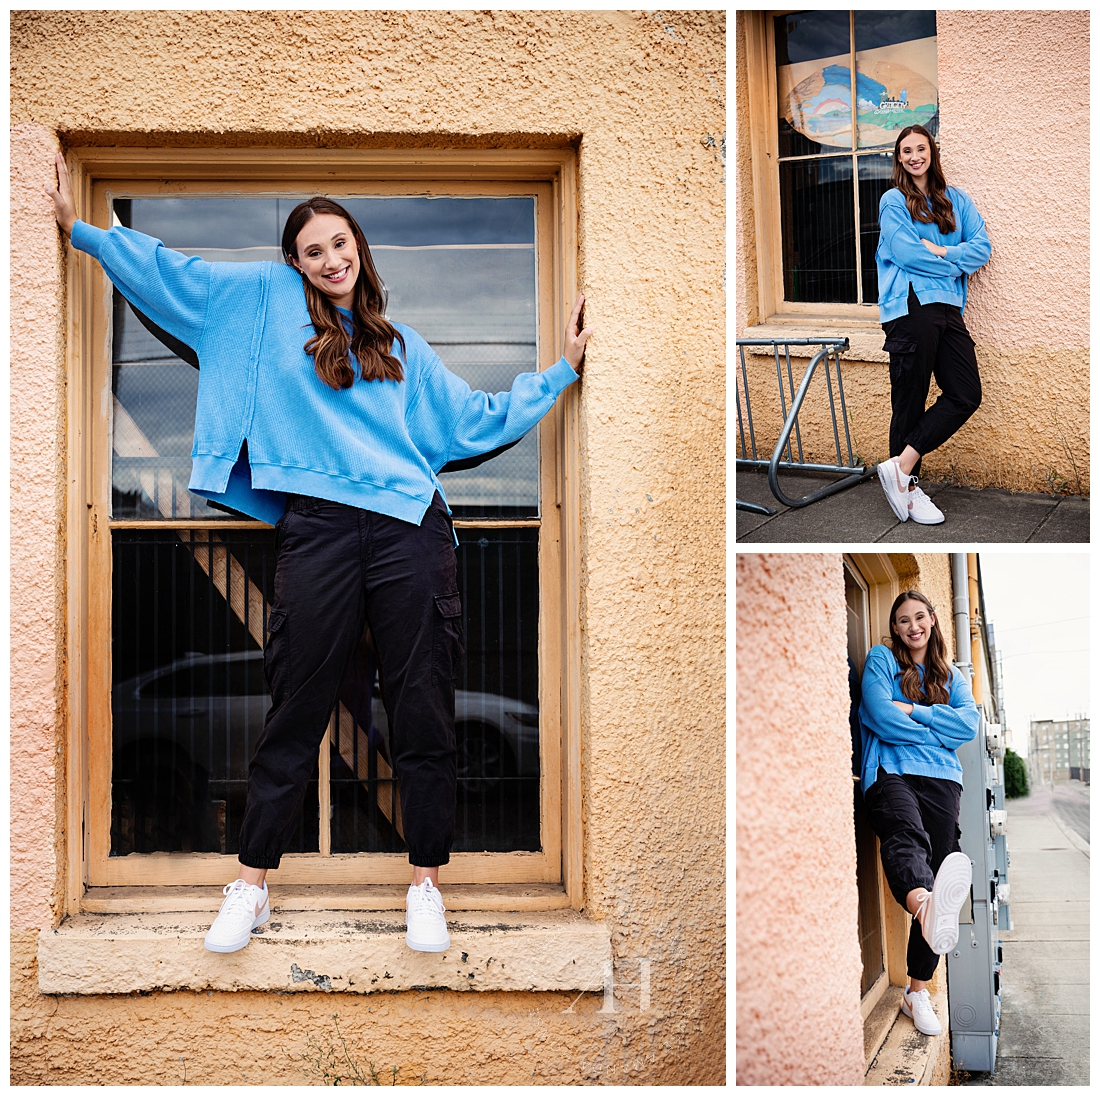 Fun, Outdoor Senior Portraits in Urban Area | Tacoma Senior Portraits | by the Best Amanda Howse Photography